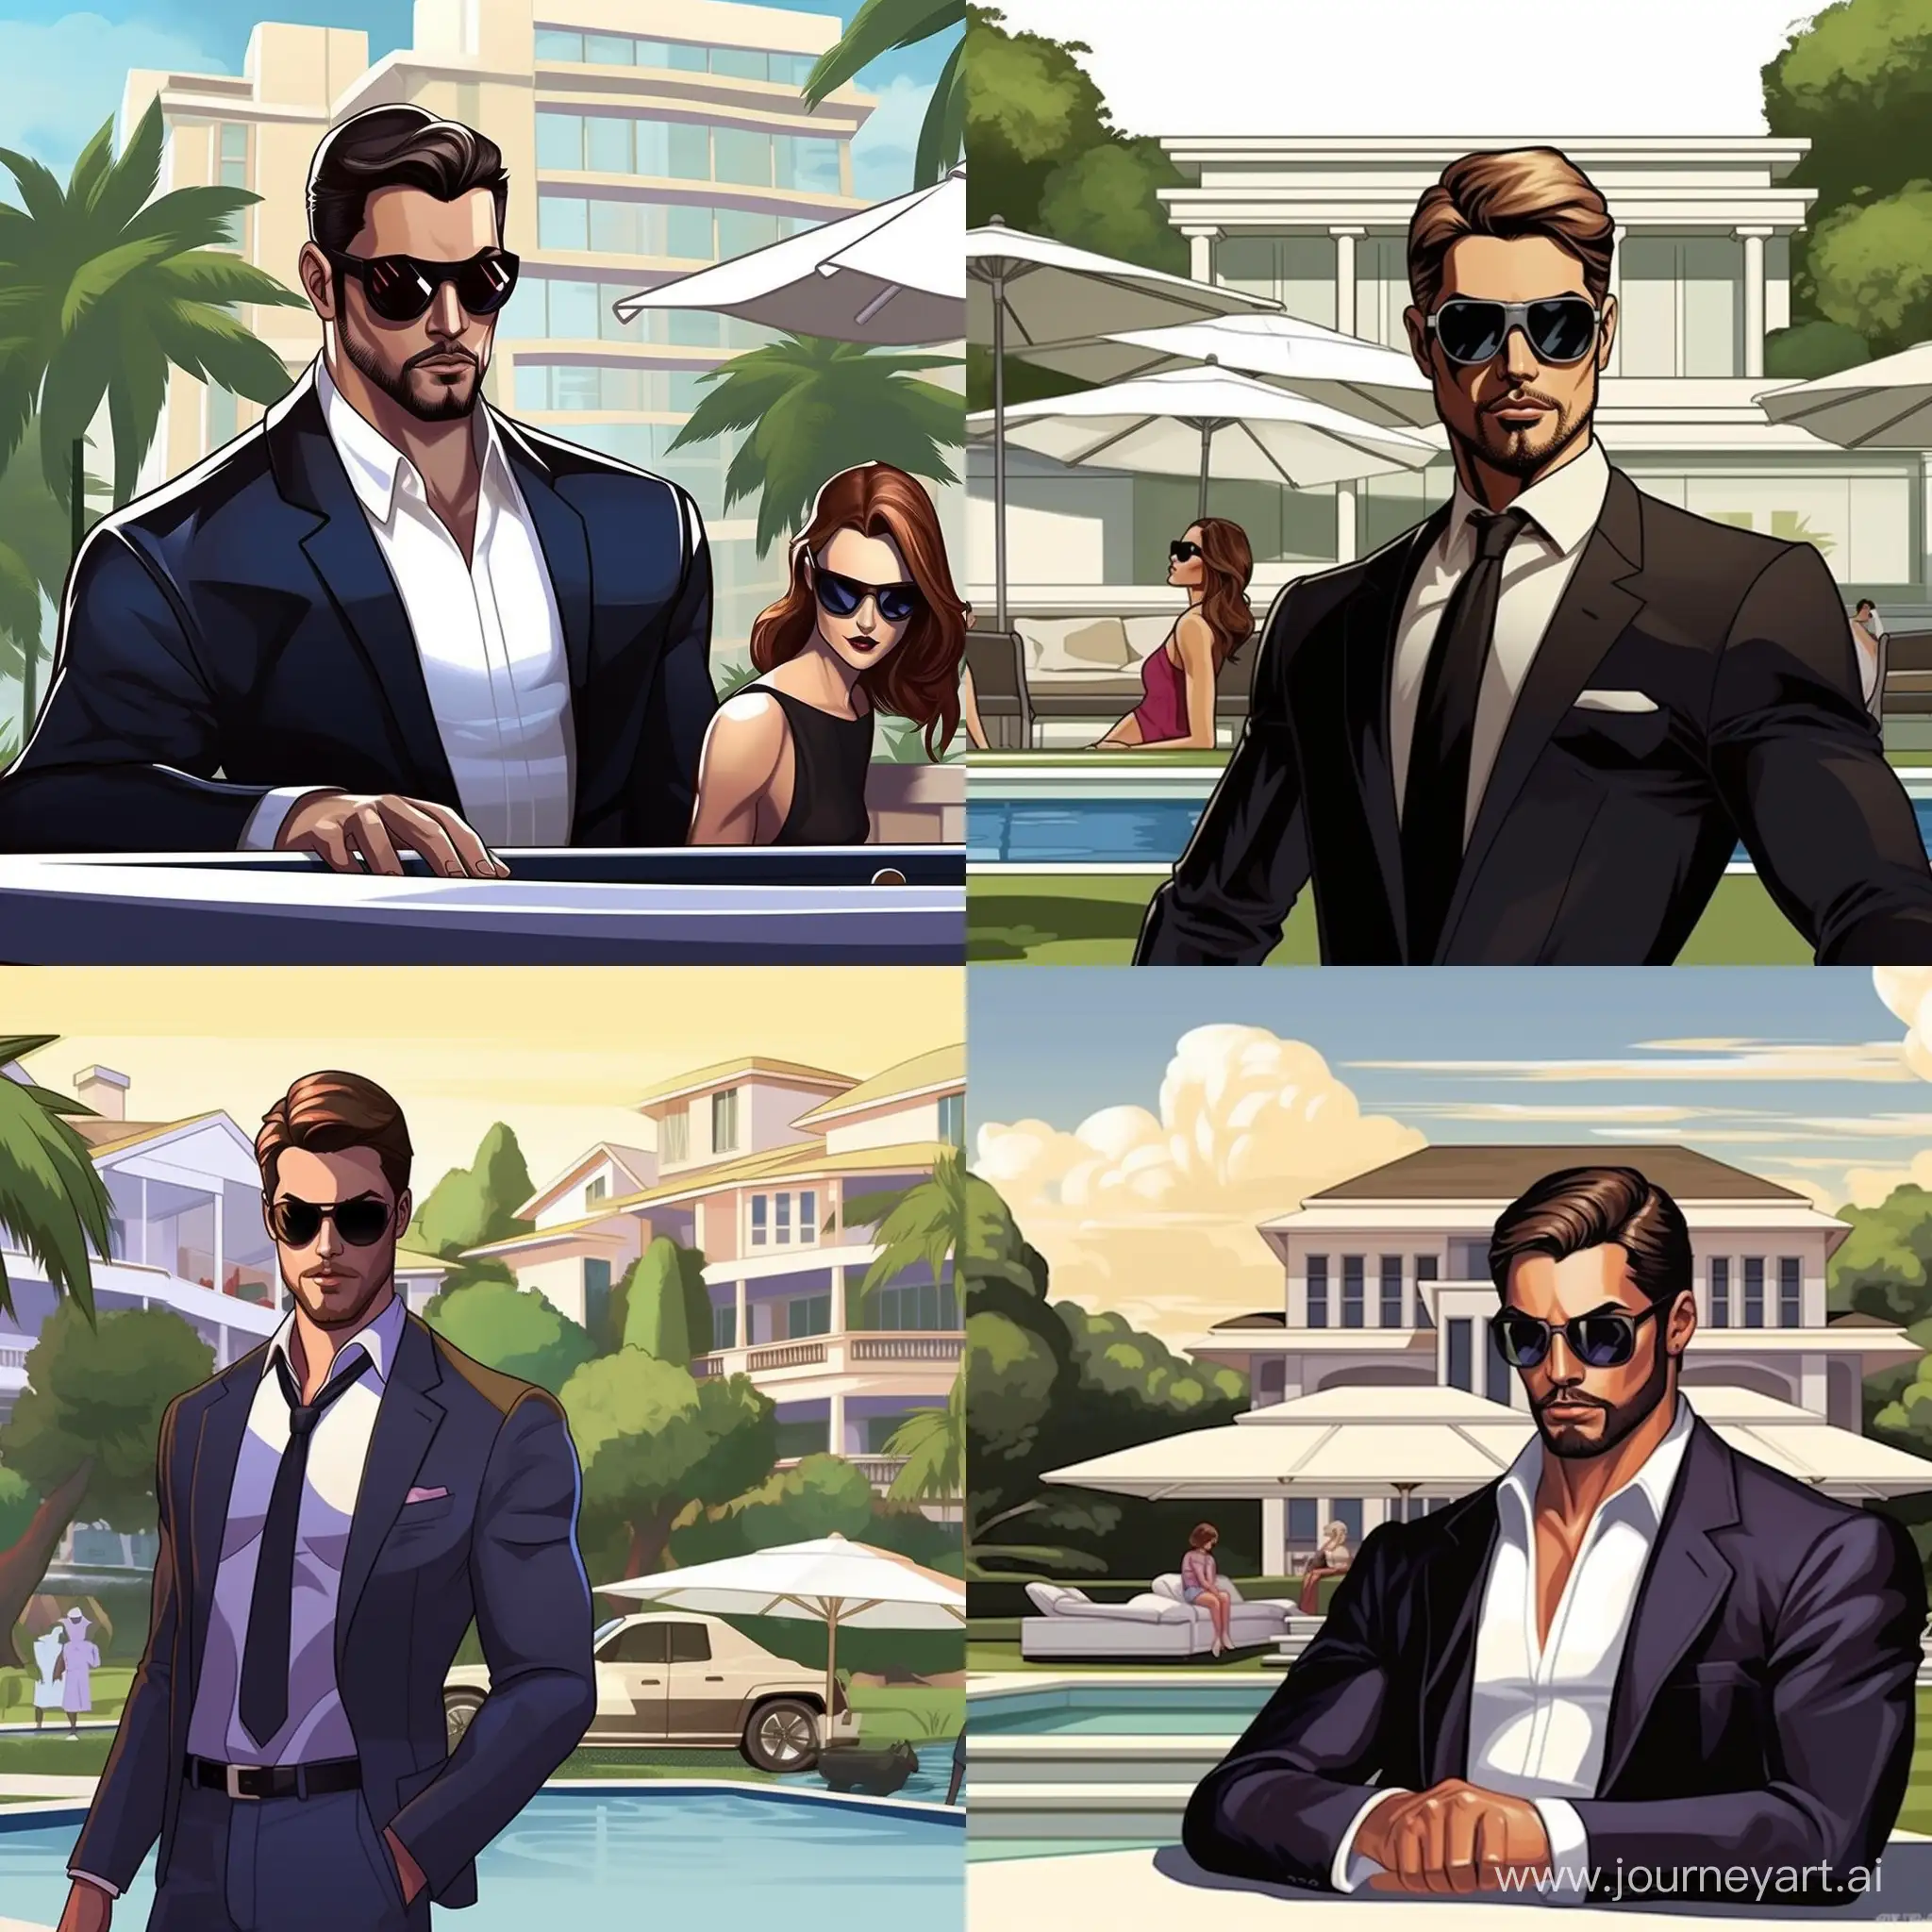 set the scene as bright sunny day with an affluent man as the main character, hes got blue eyes, good amount of muscle, pool in the background with young girls trying to date him in the background